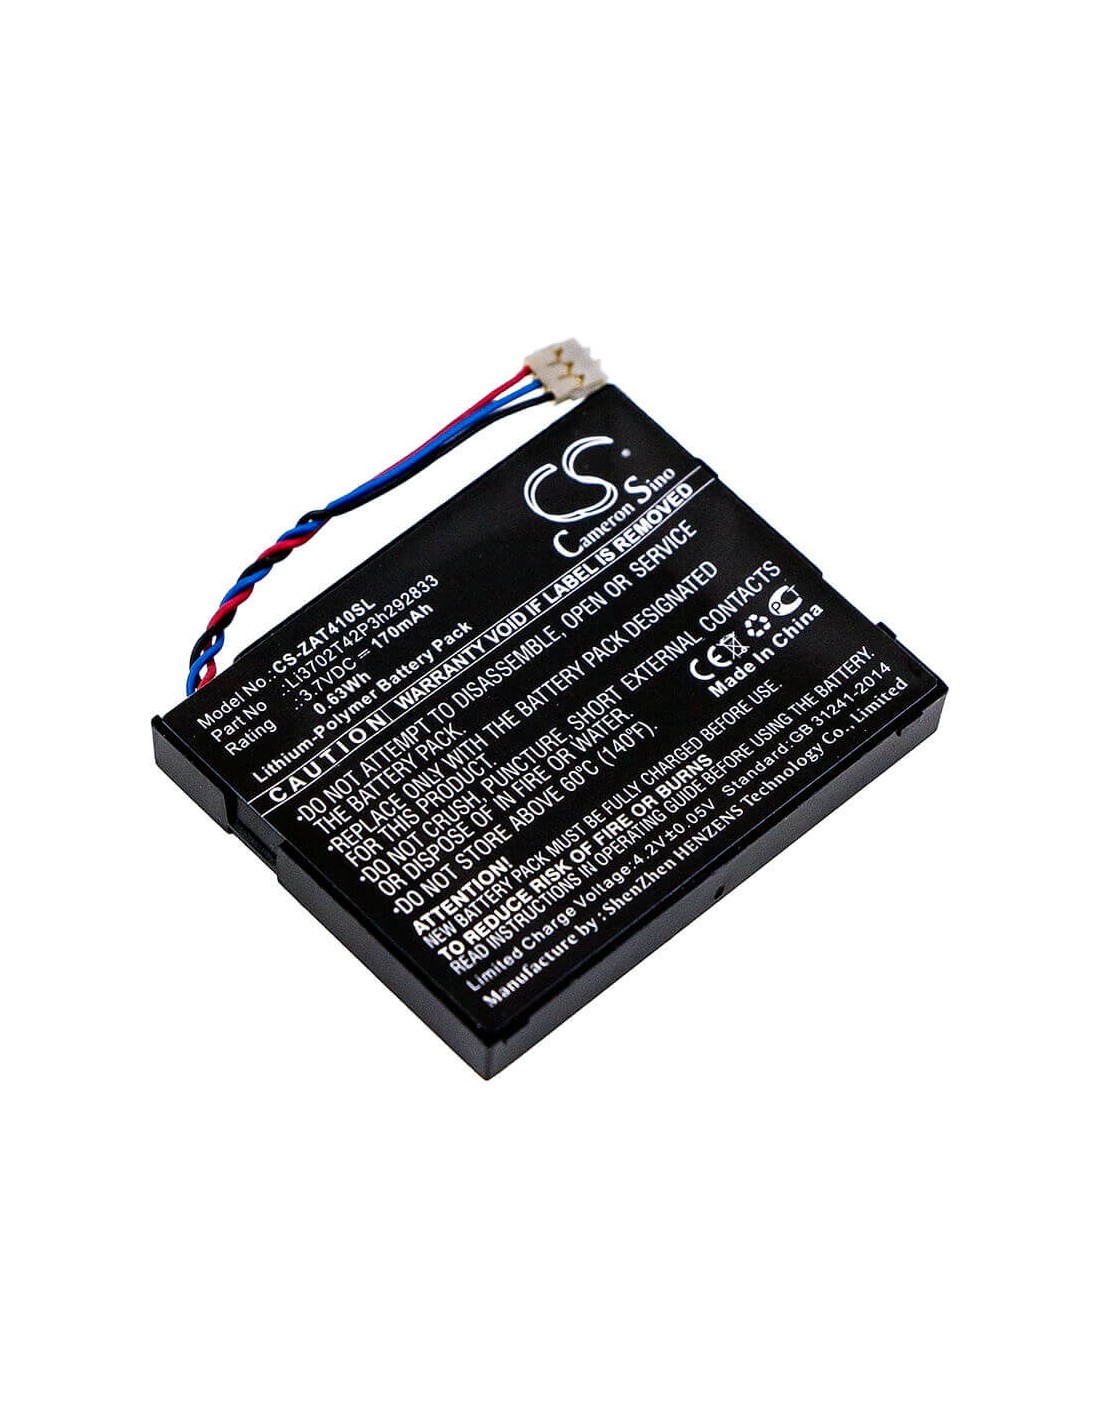 Battery for Zte, 2ahr8-at41, At41, Gd500 3.7V, 170mAh - 1.18Wh